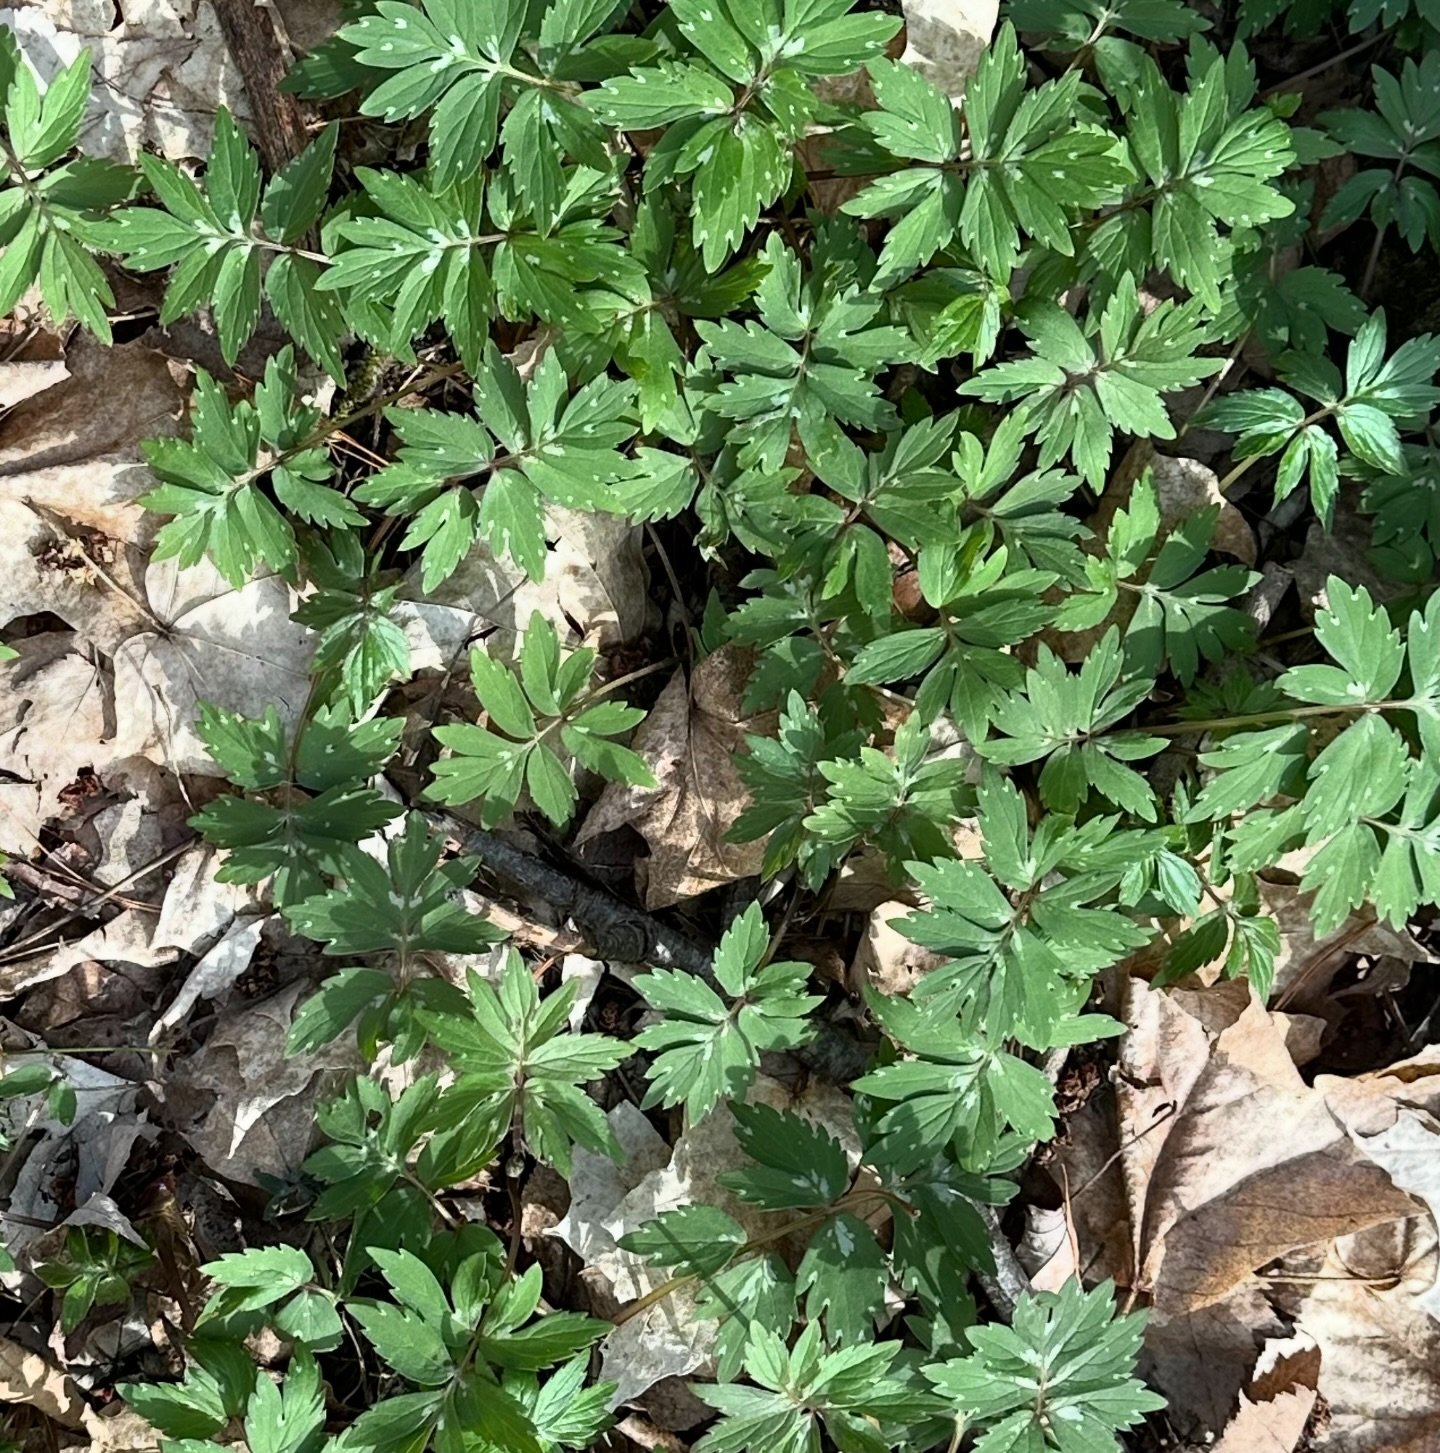 Plants are emerging, and in some cases buds forming, or flowers blooming! This is Virginia Waterleaf and you can see the early season &ldquo;water marks&rdquo; on the leaves. These spots may fade over the season.

We wanted to let folks know that we 